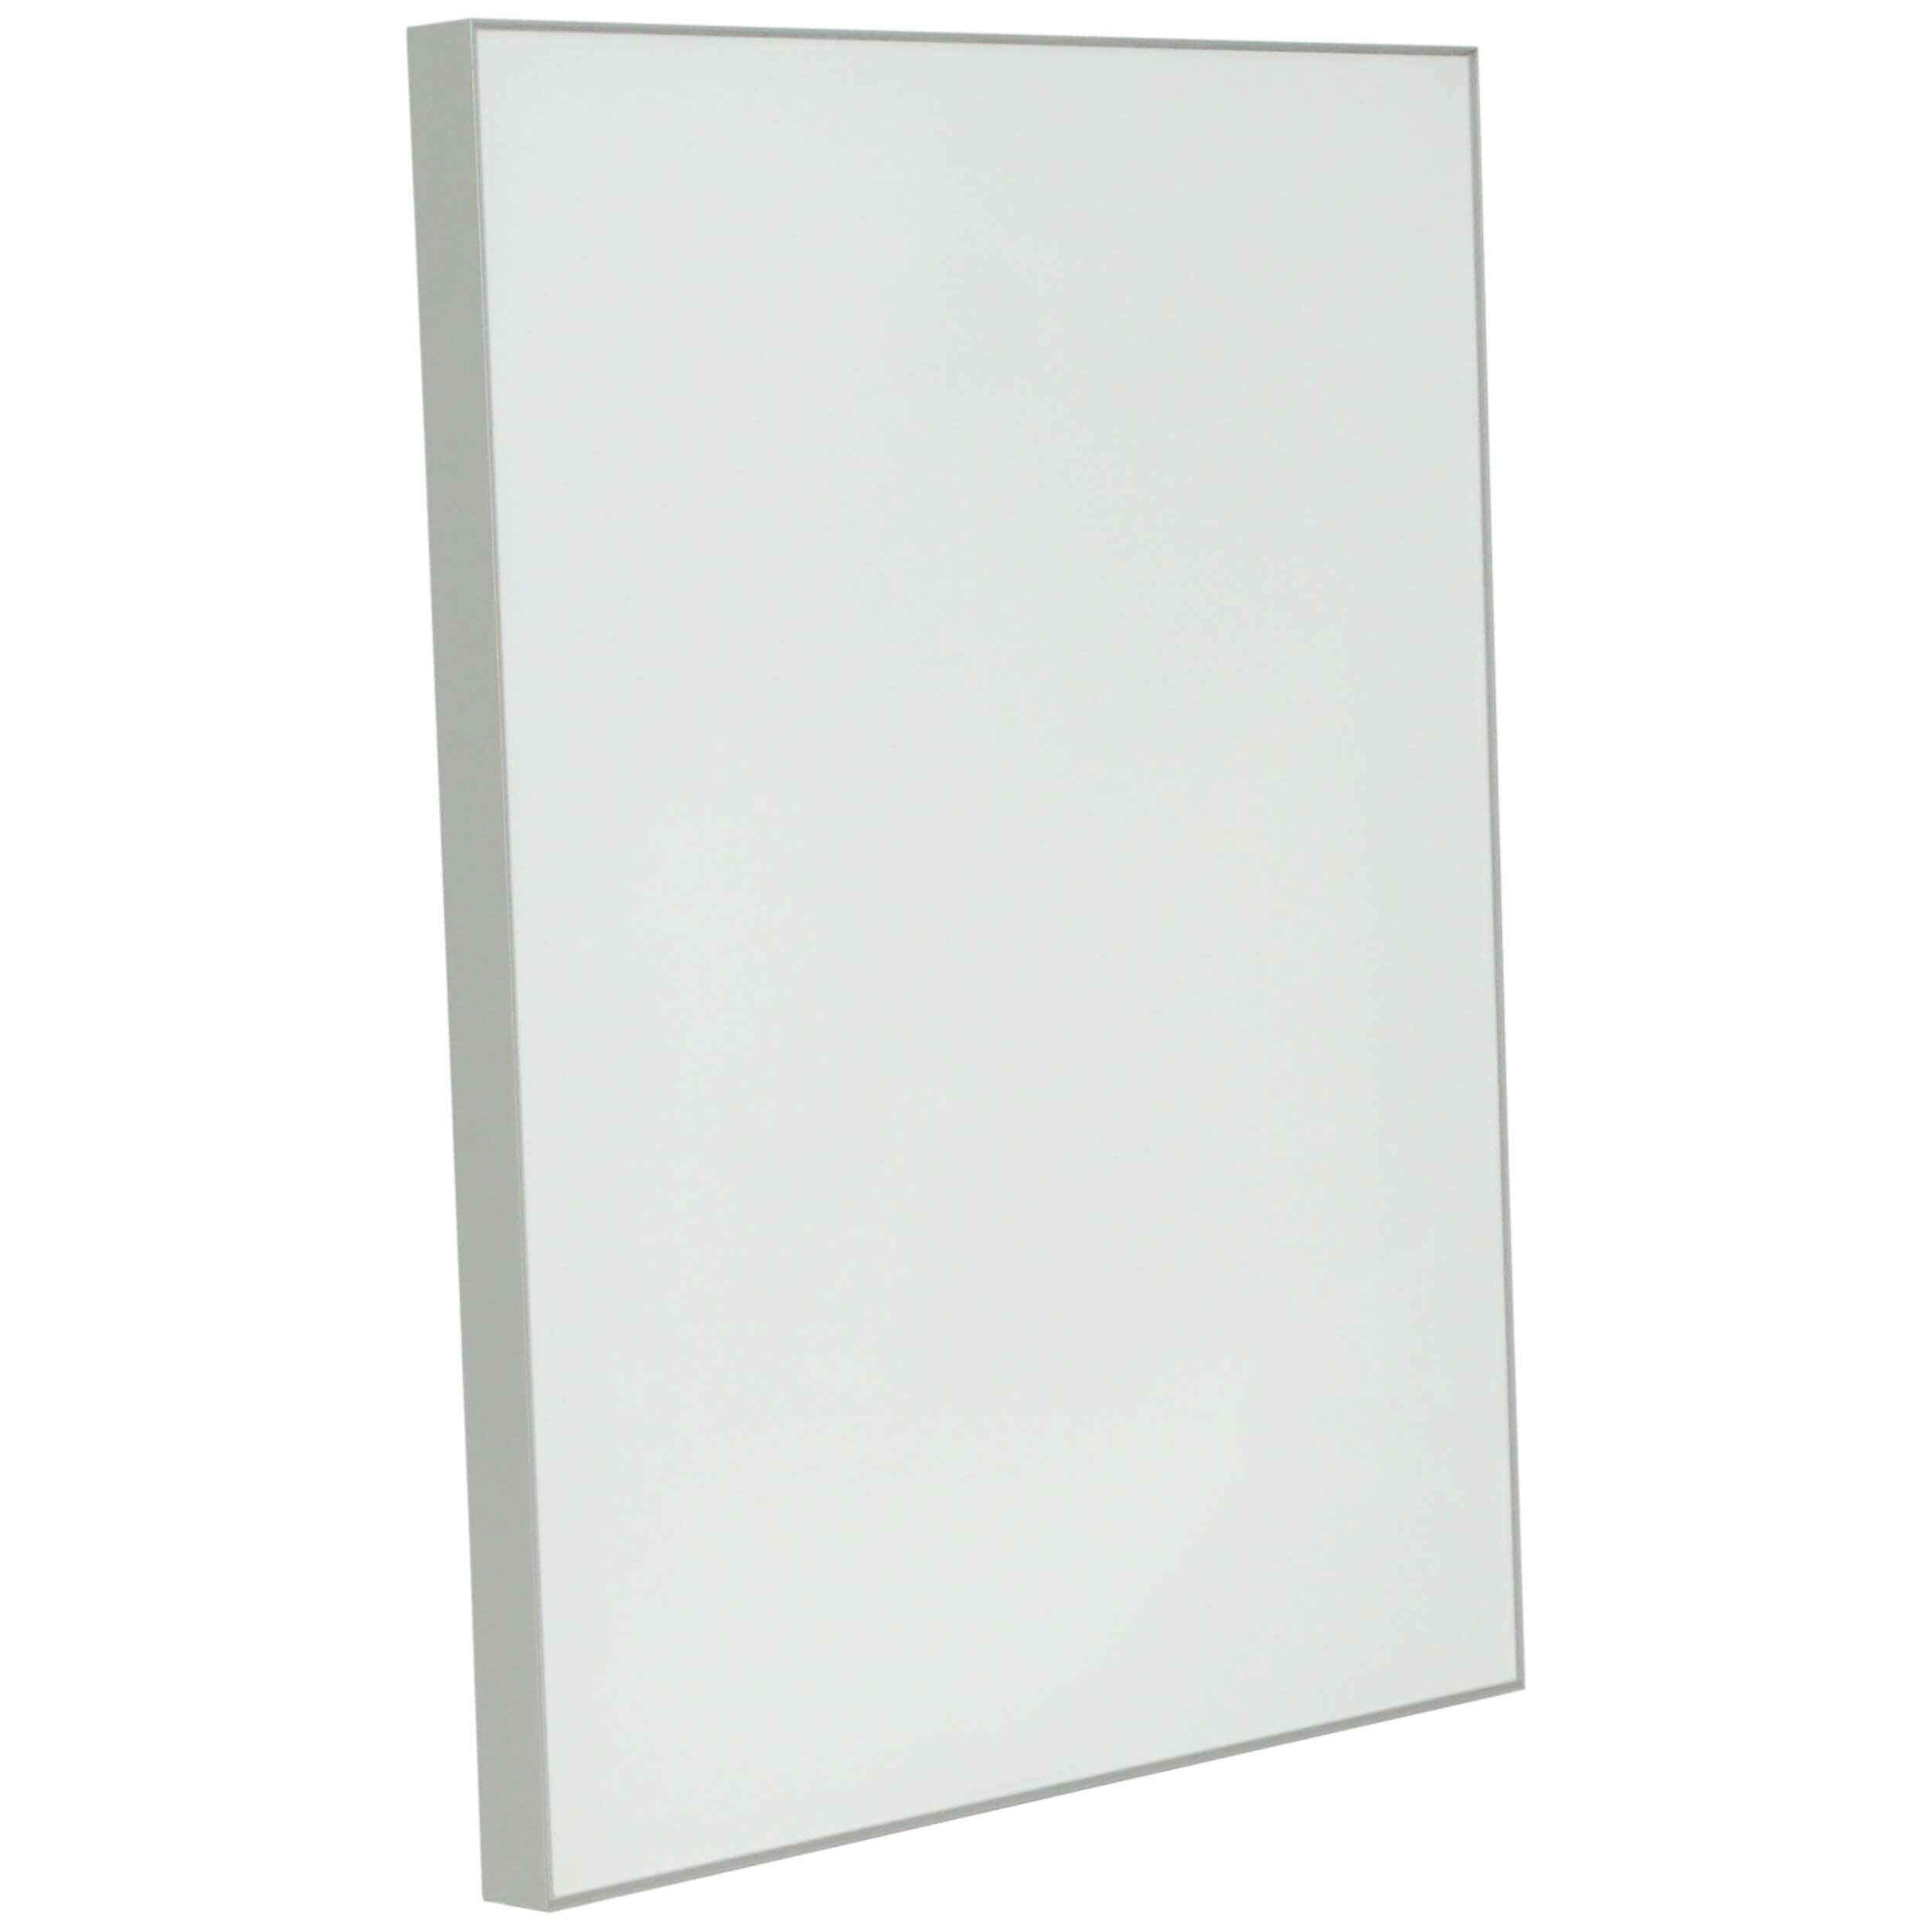 metal-and-glass-cabinet-door-af006_whitegloss_iso.jpg